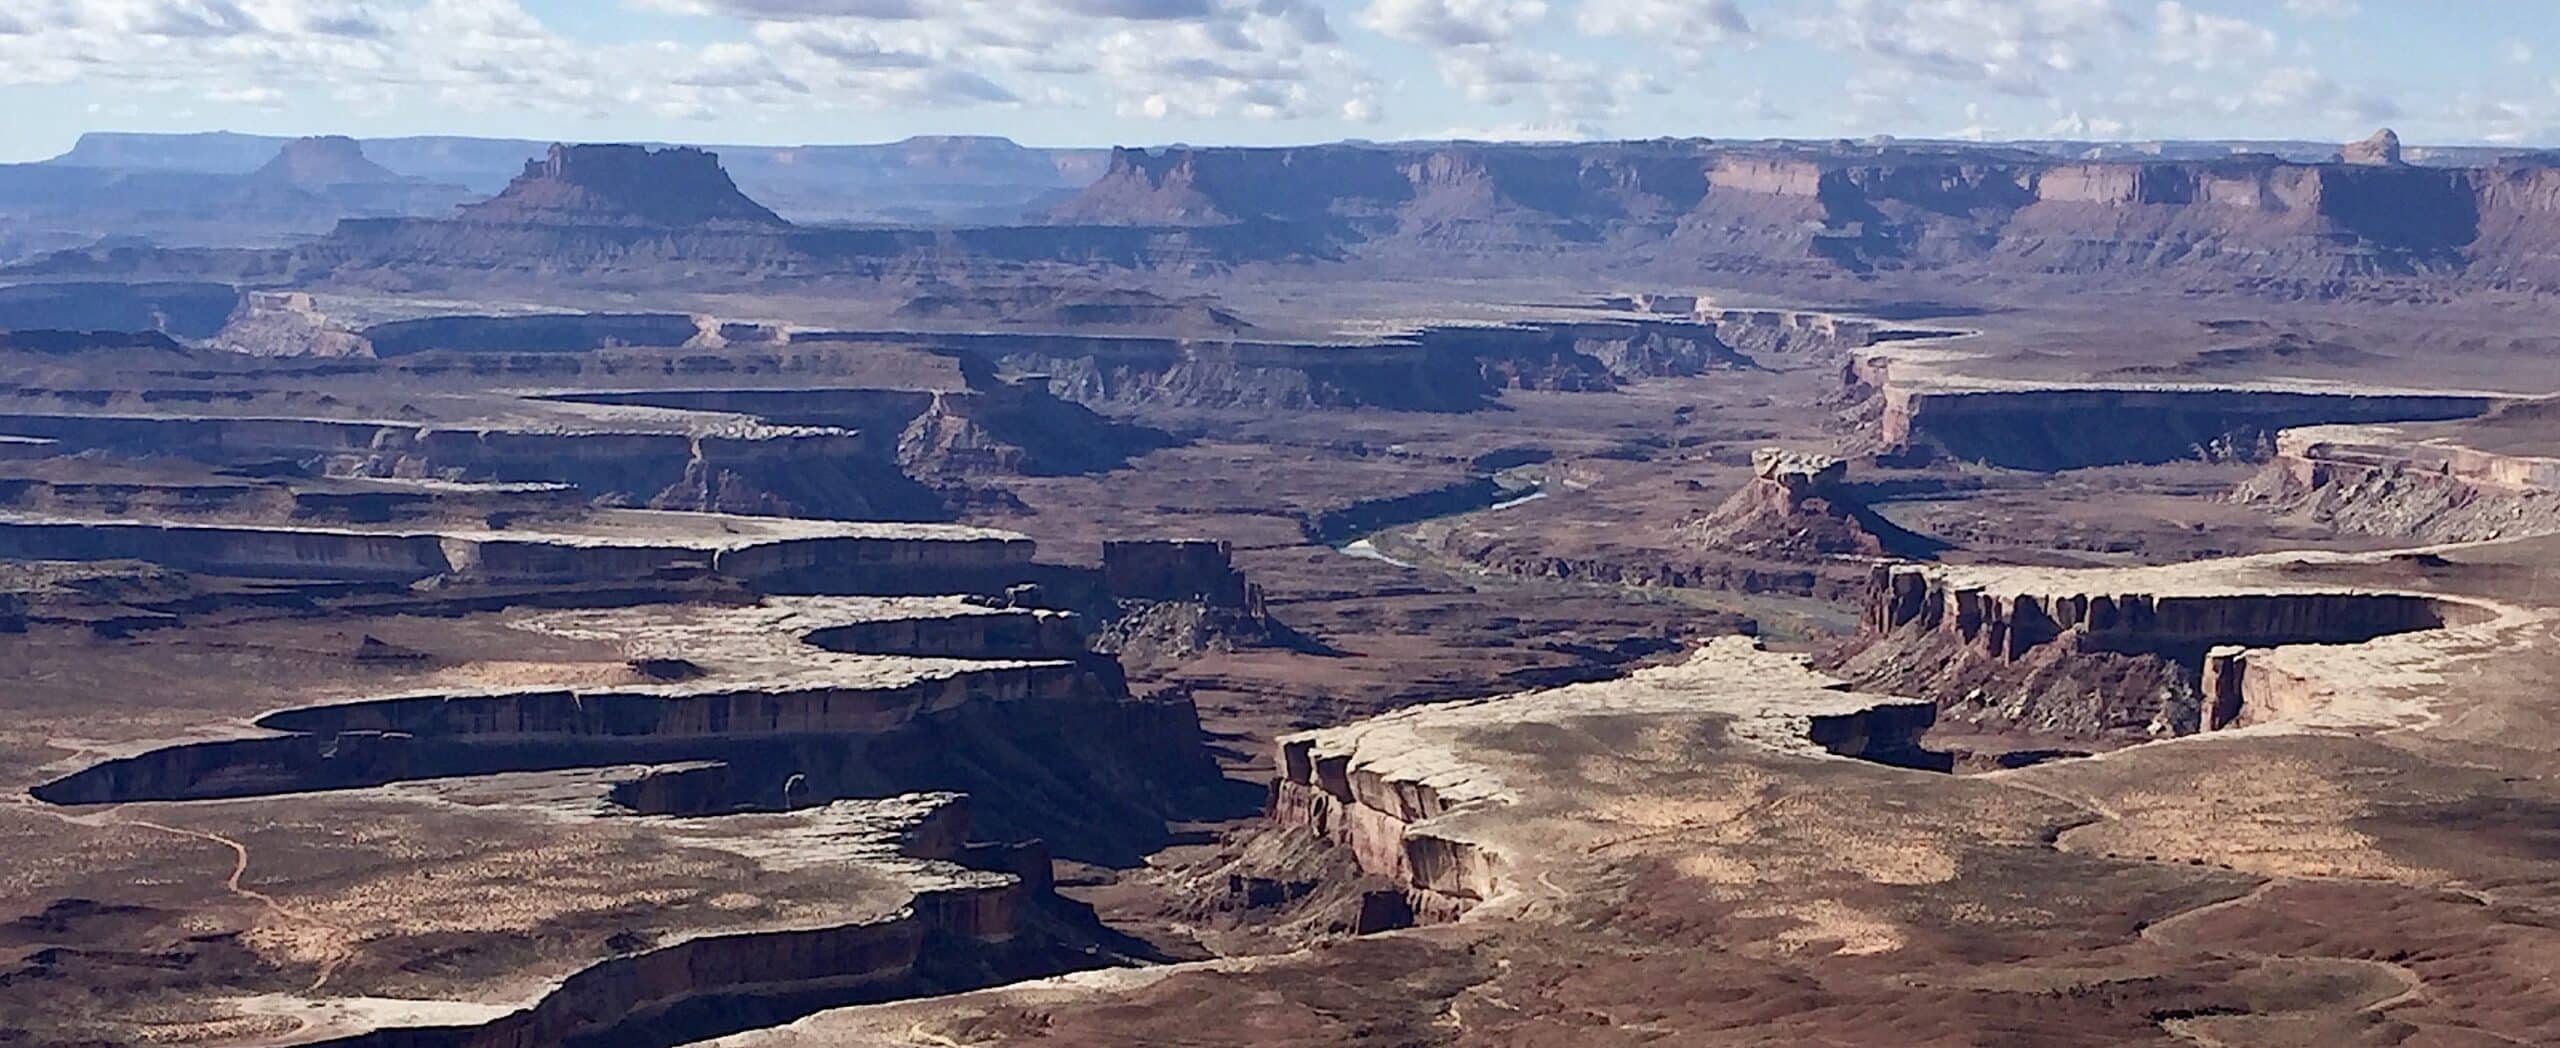 Canyonlands National Park, Utah from Island in the Sky: Exploring Canyonlands National Park on Slow Down, See More